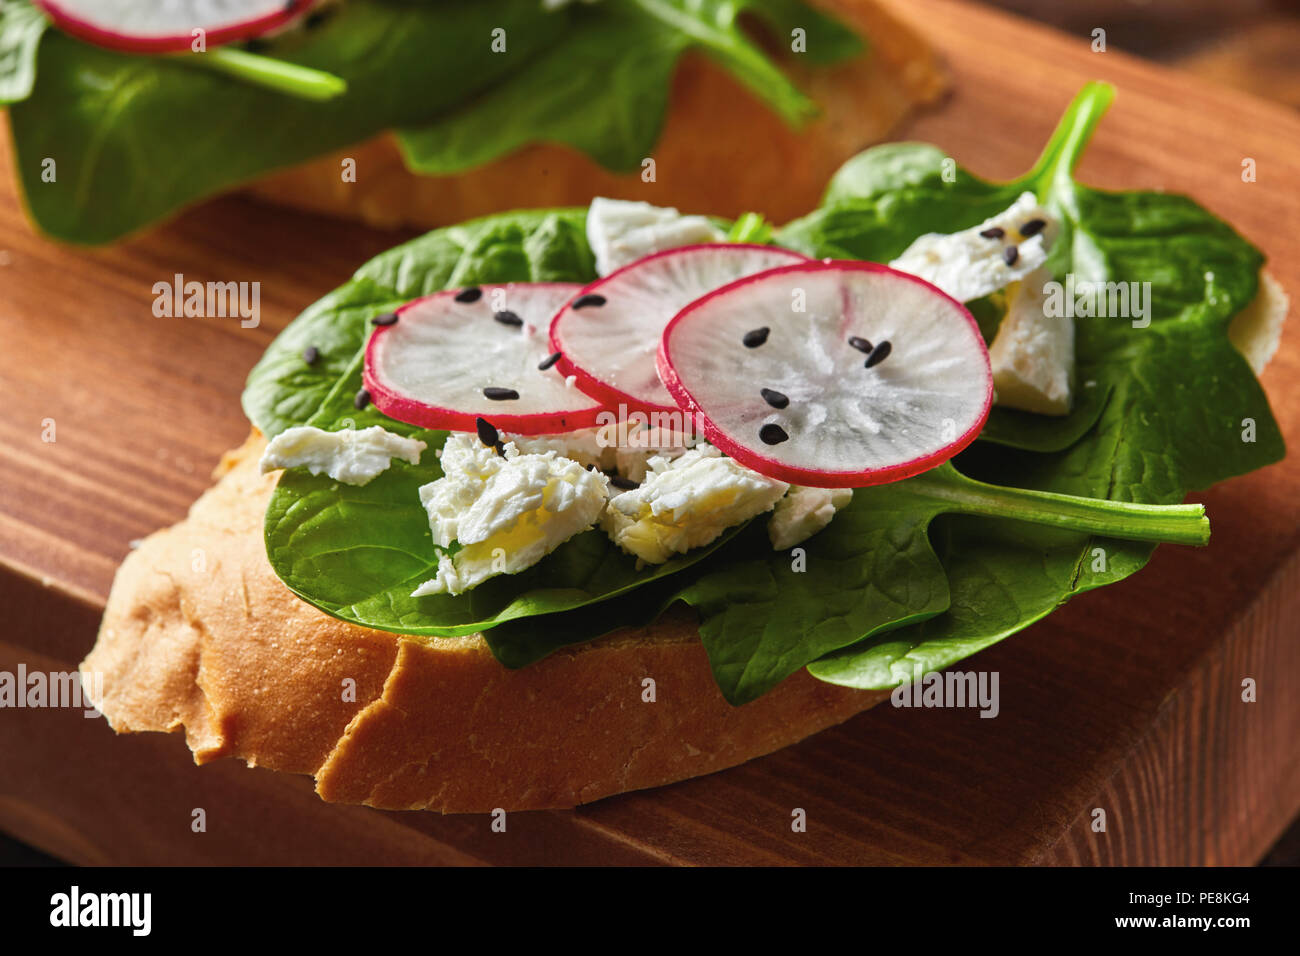 Light healthy sandwiches with bread toasts, soft cheese and freshly gathered organic radishes, spinach on a wooden board. Stock Photo